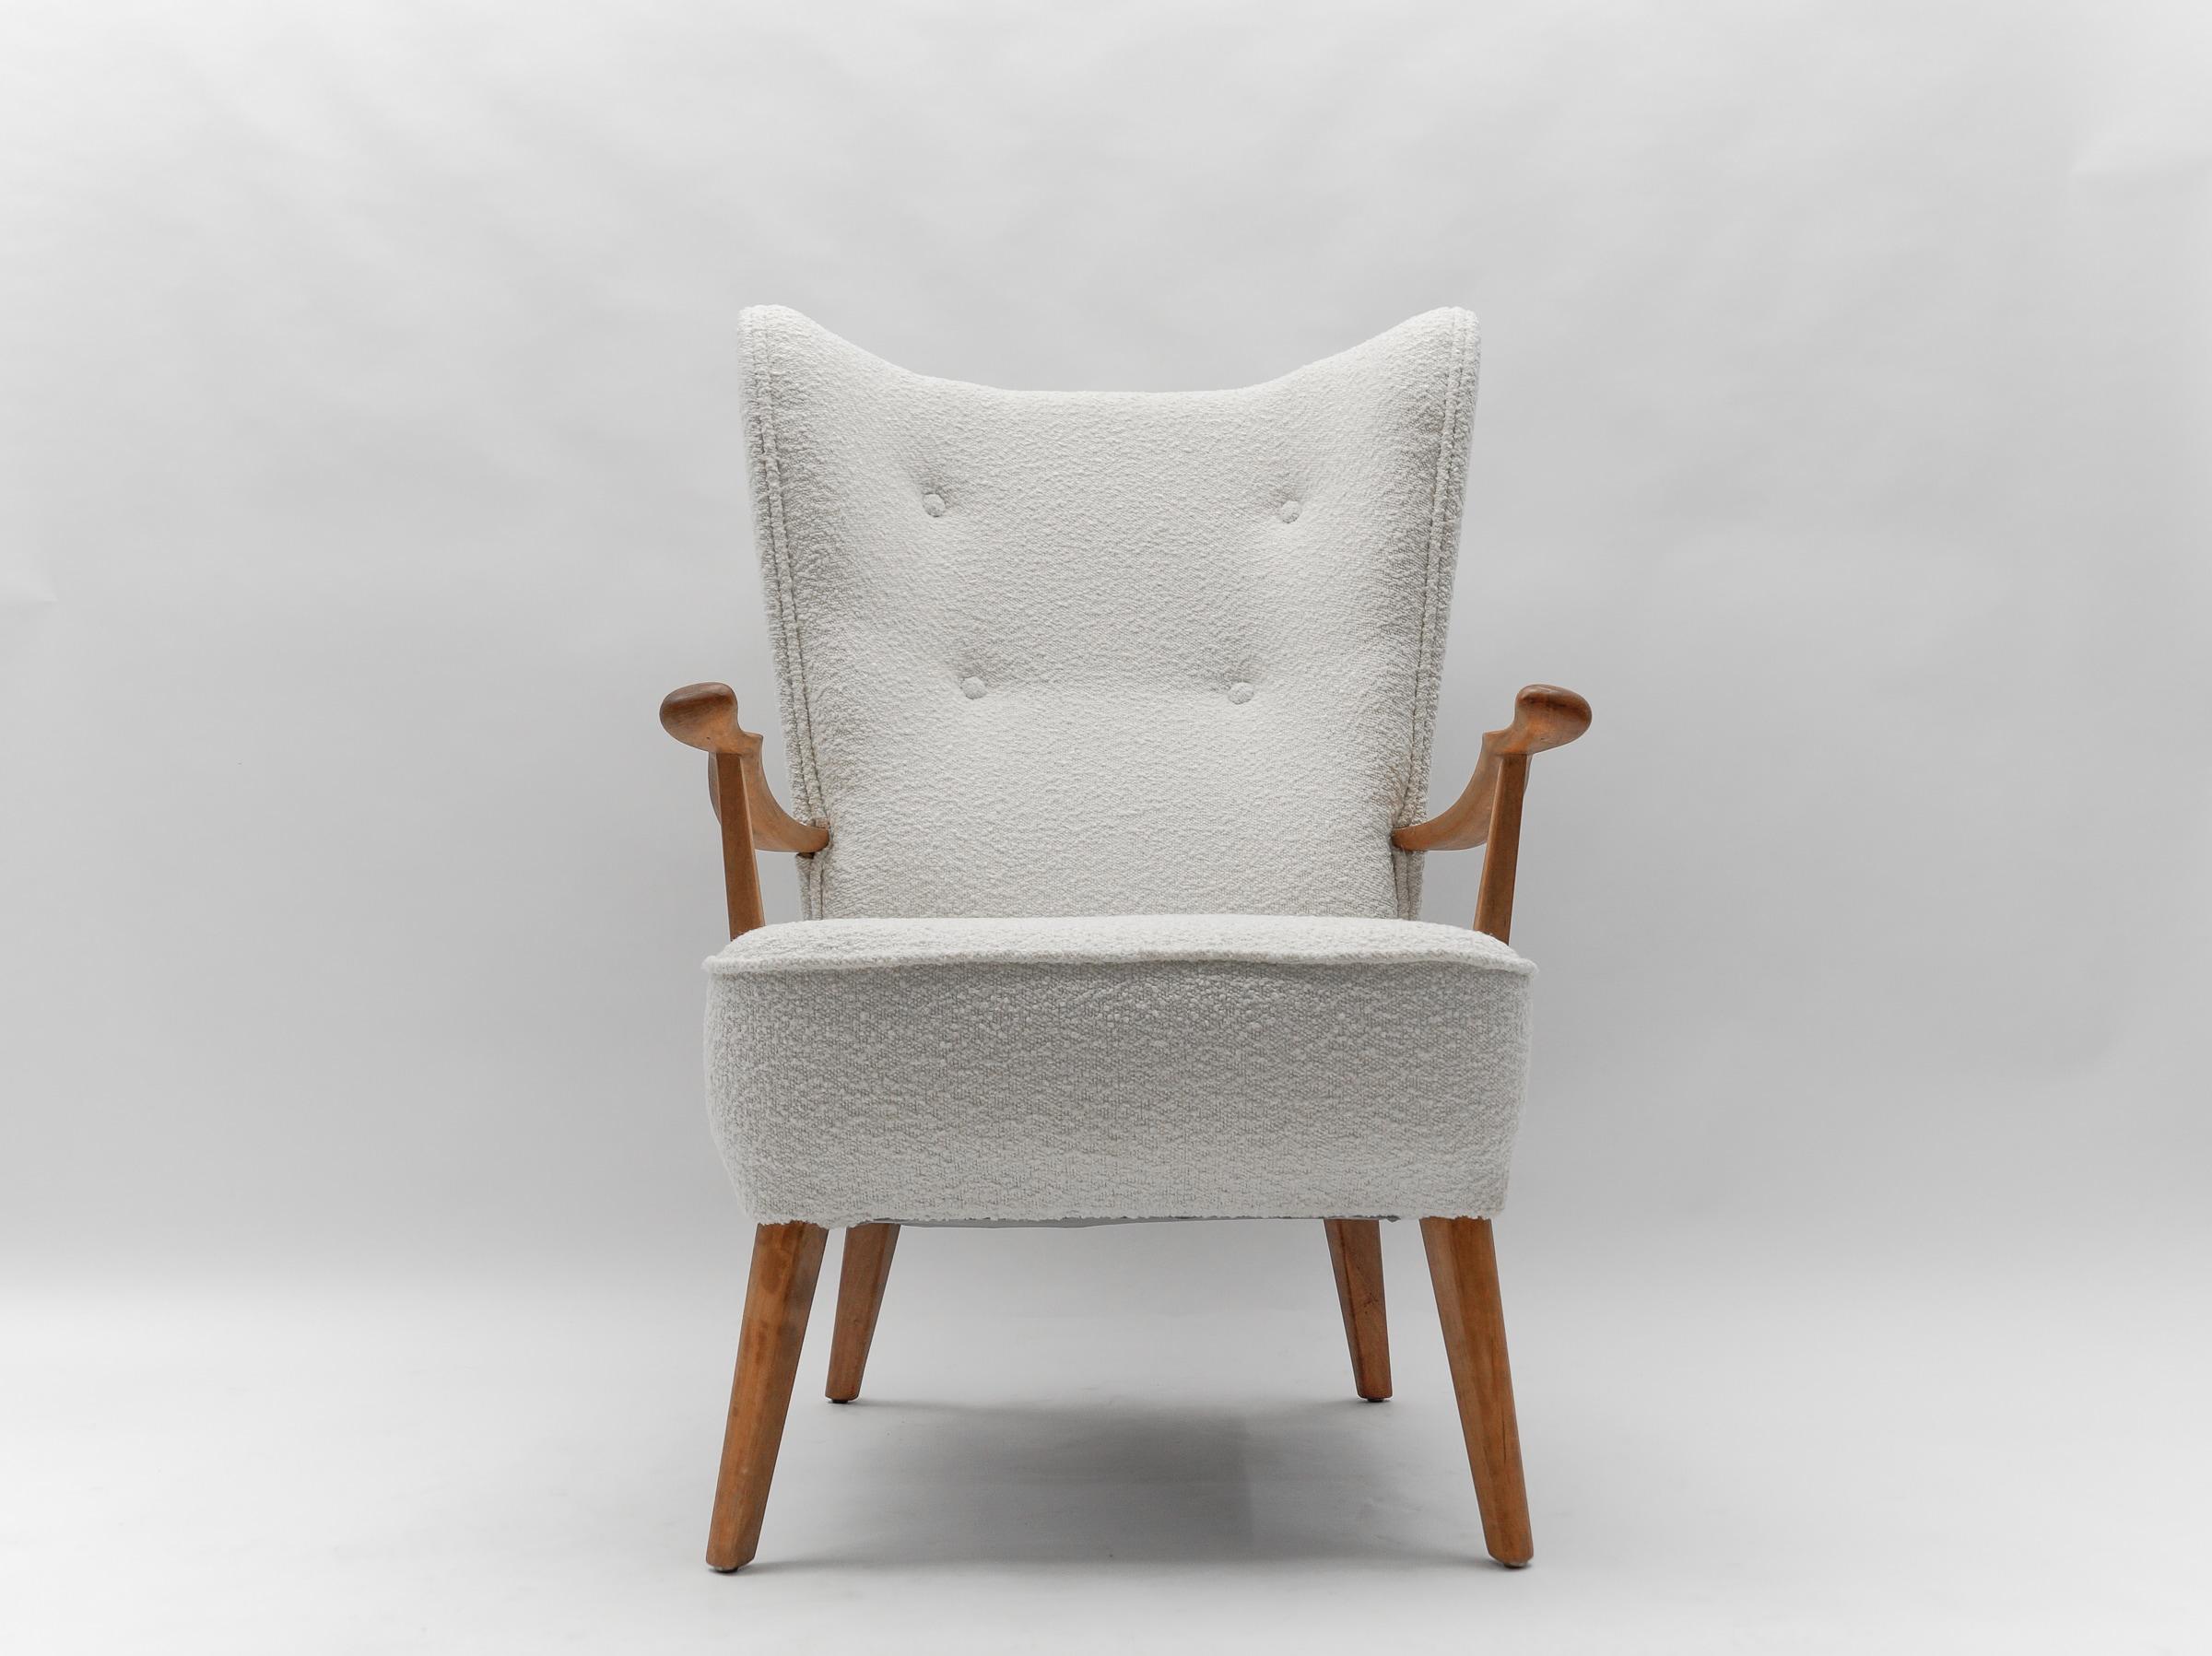 Awesome armchair.

New upholstery in white boucle fabric.
